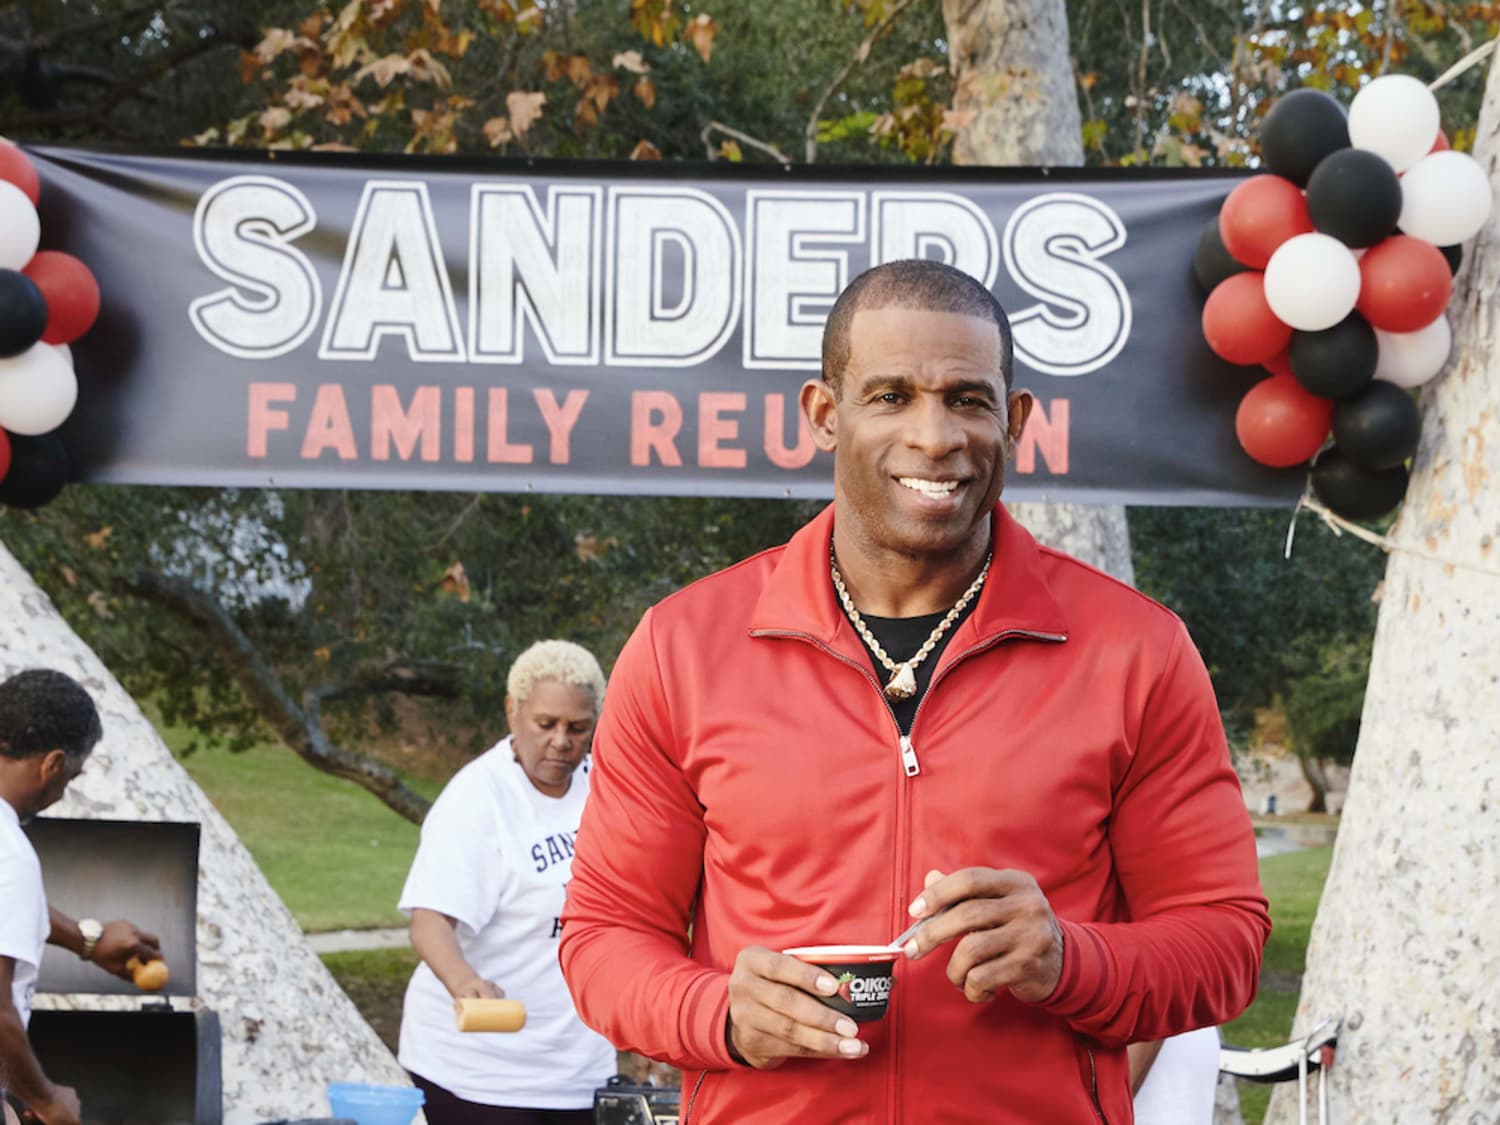 Deion Sanders stars with family in new Super Bowl ad - Good